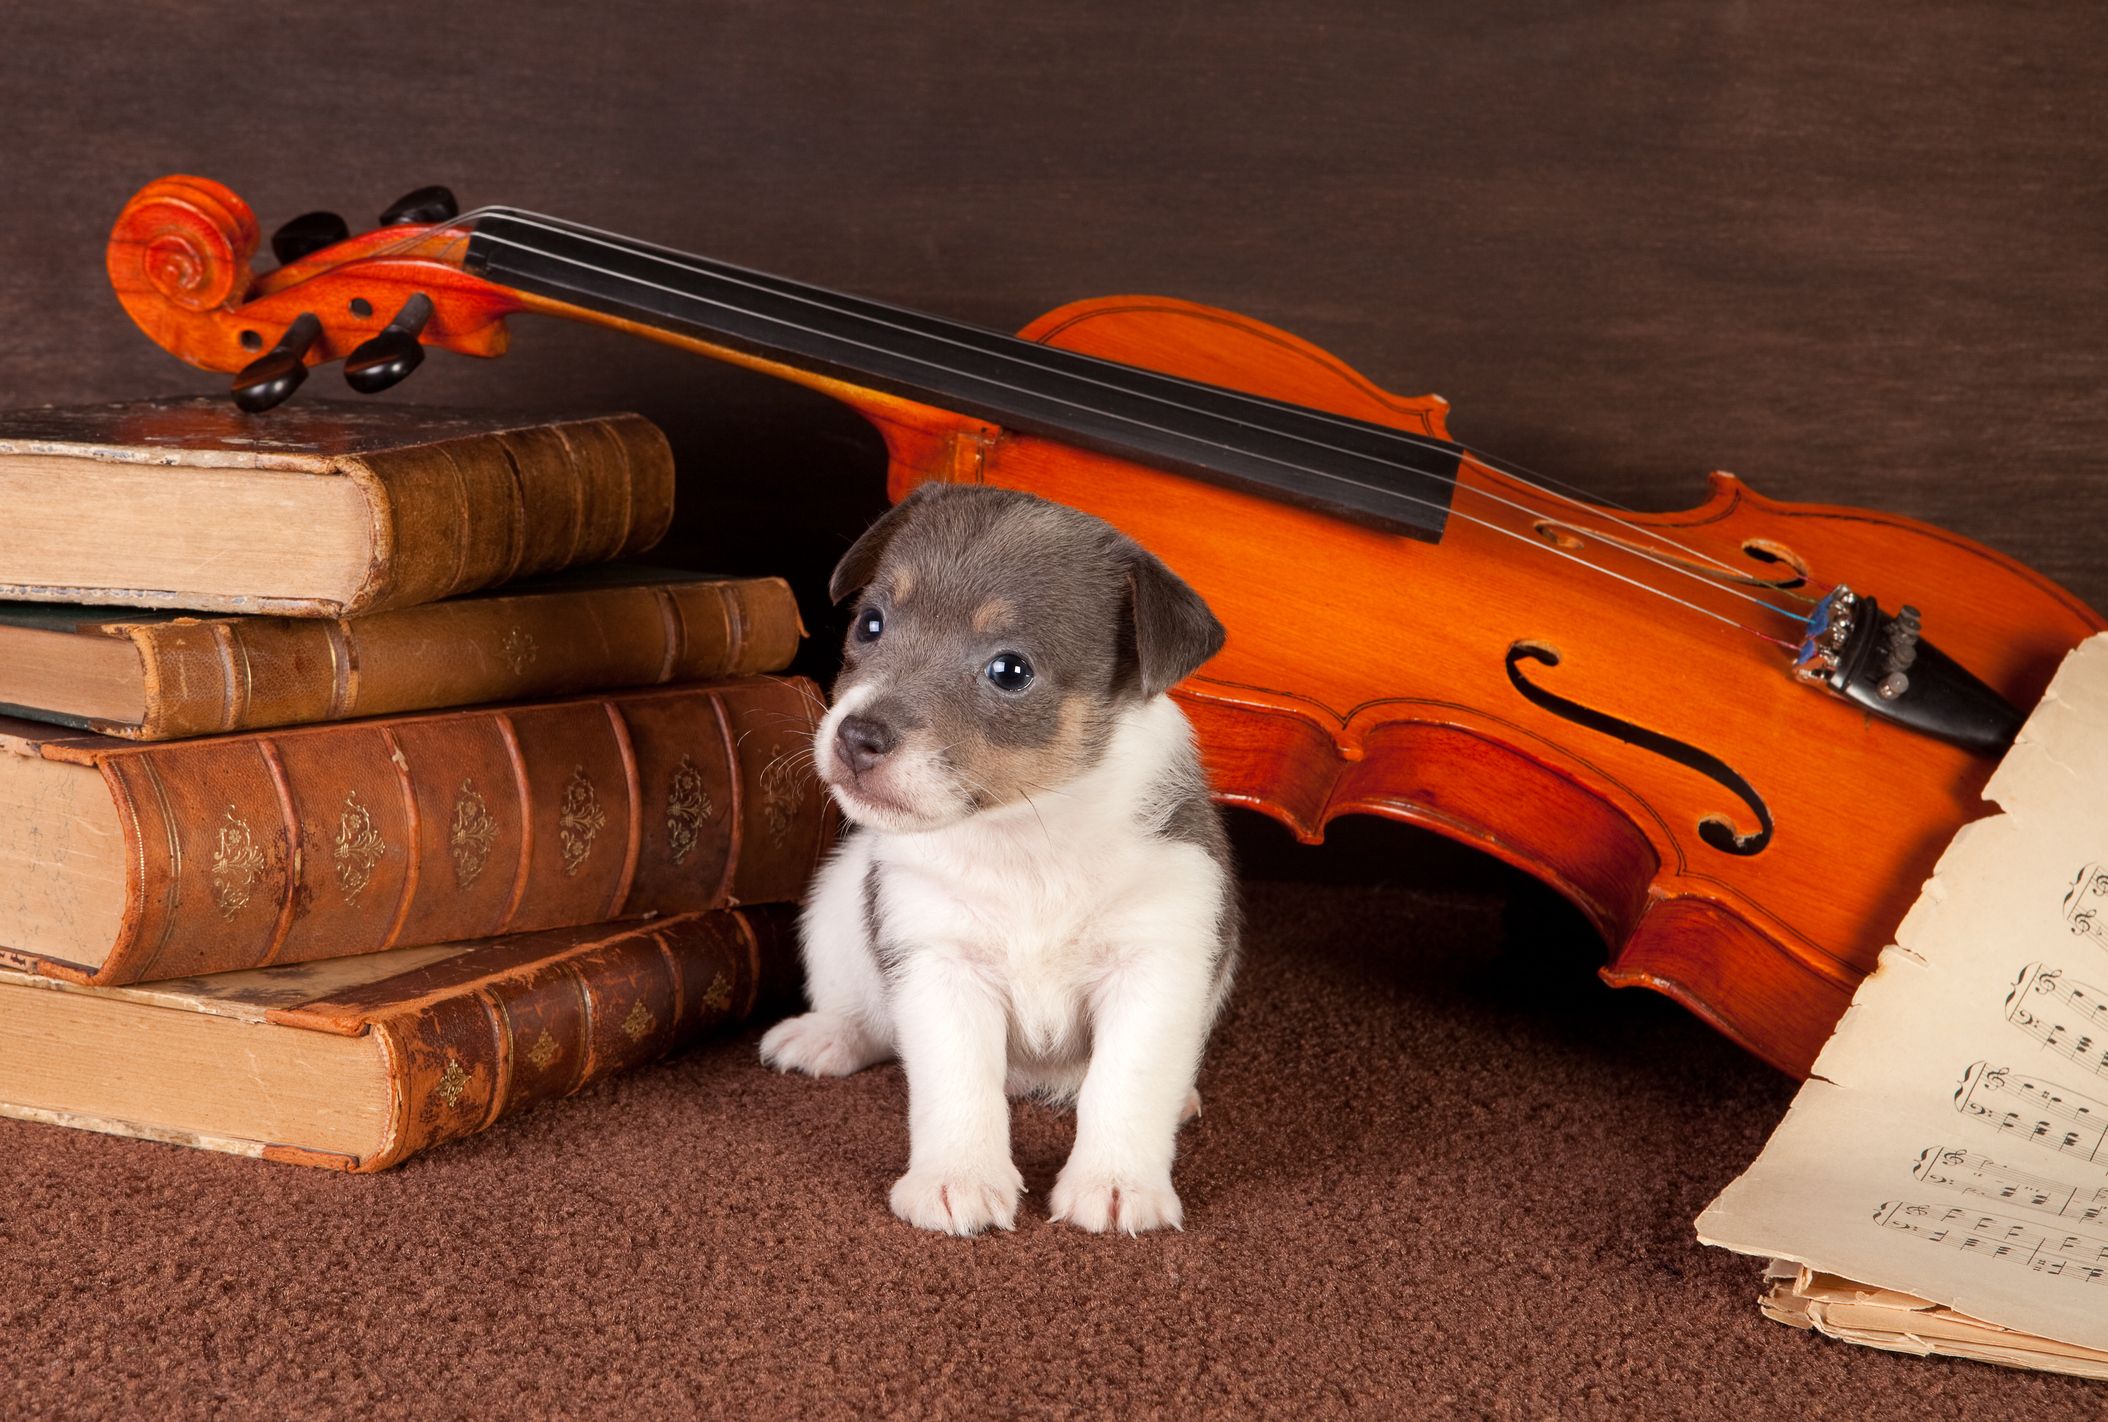 Classical Music Is Now Being Used To Calm Dogs--With Proven Results!